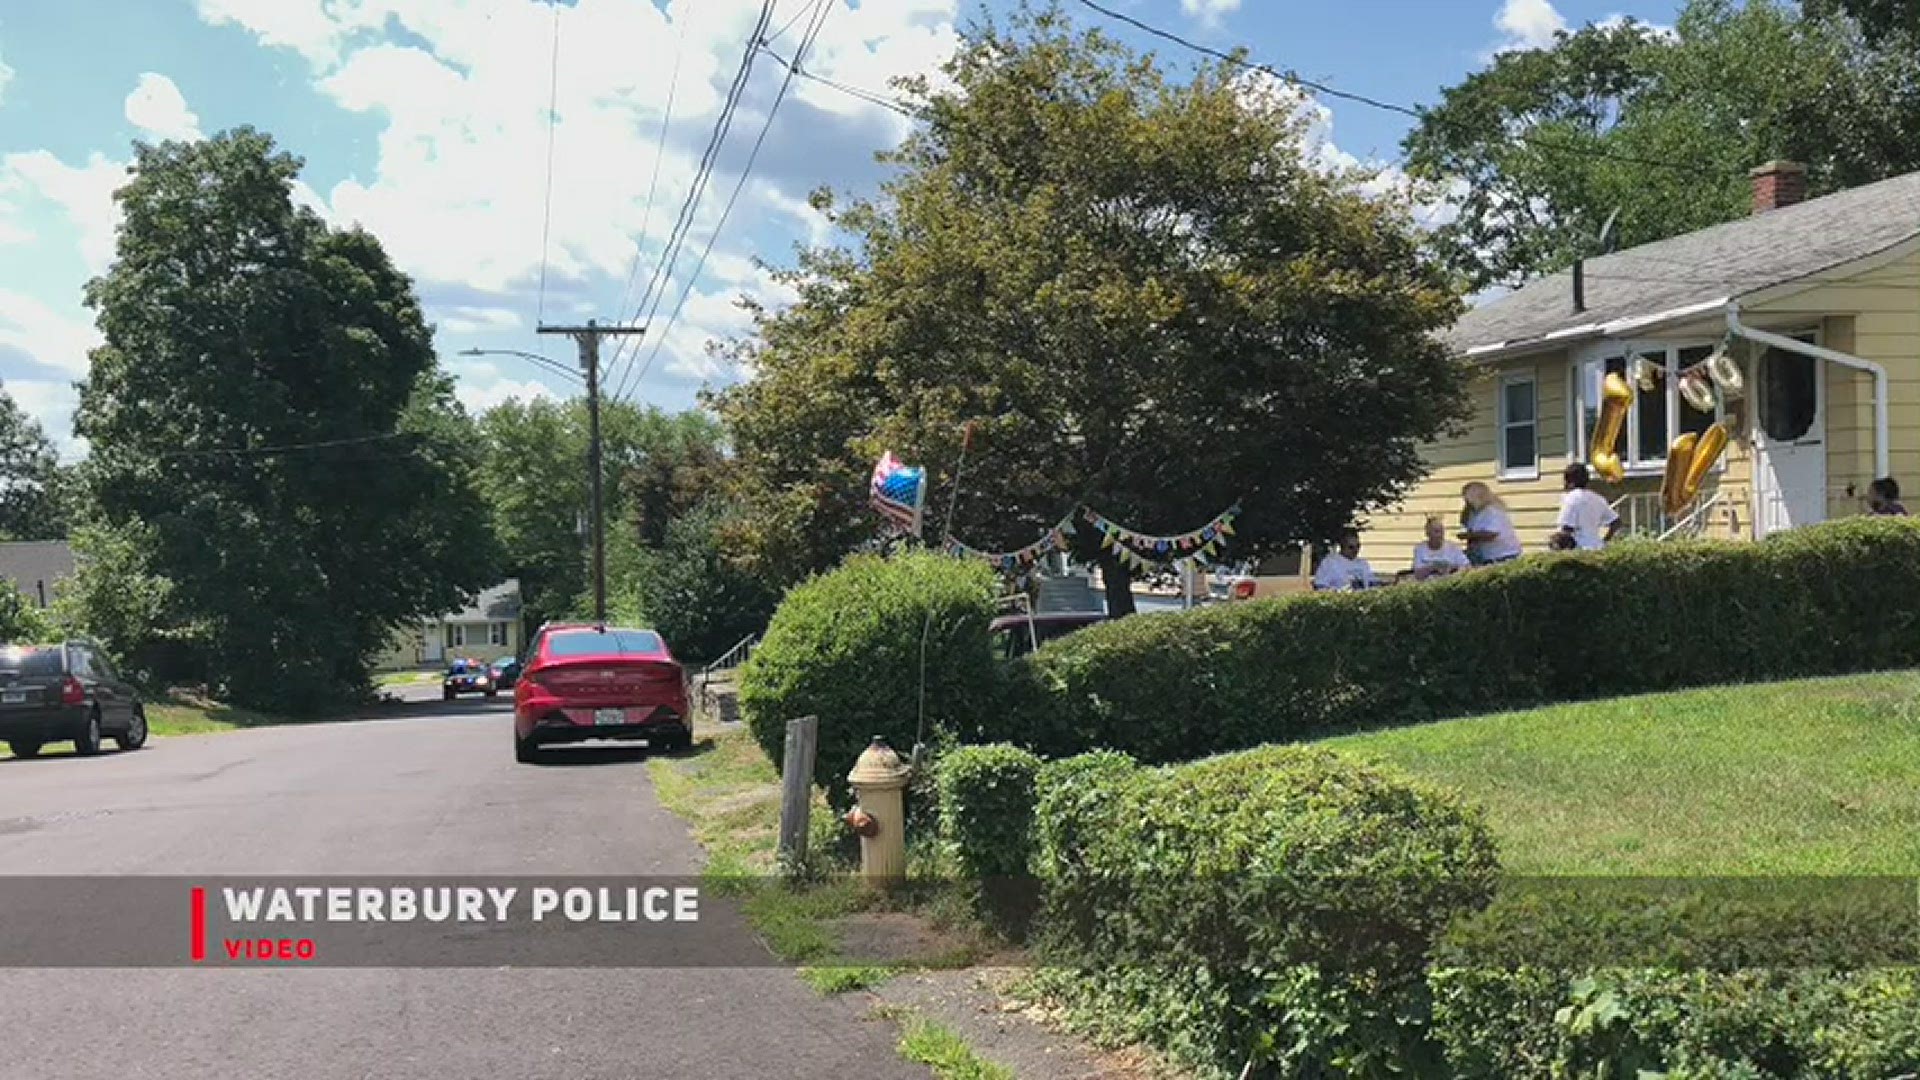 Video provided by Waterbury Police